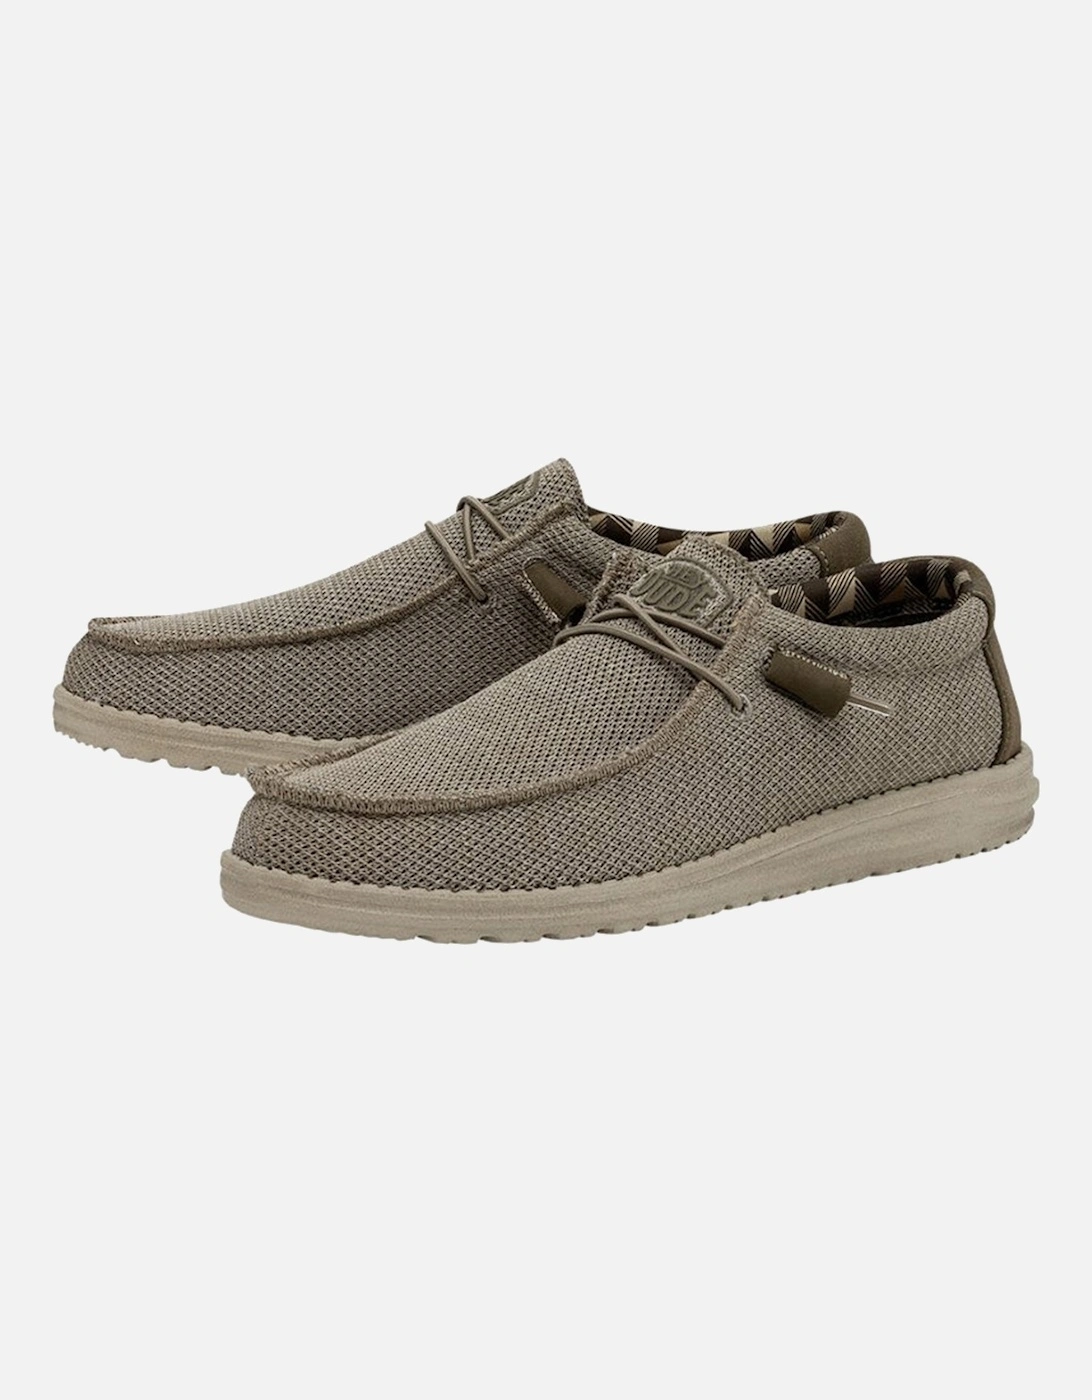 Mens Wally Sox Shoes (Beige)